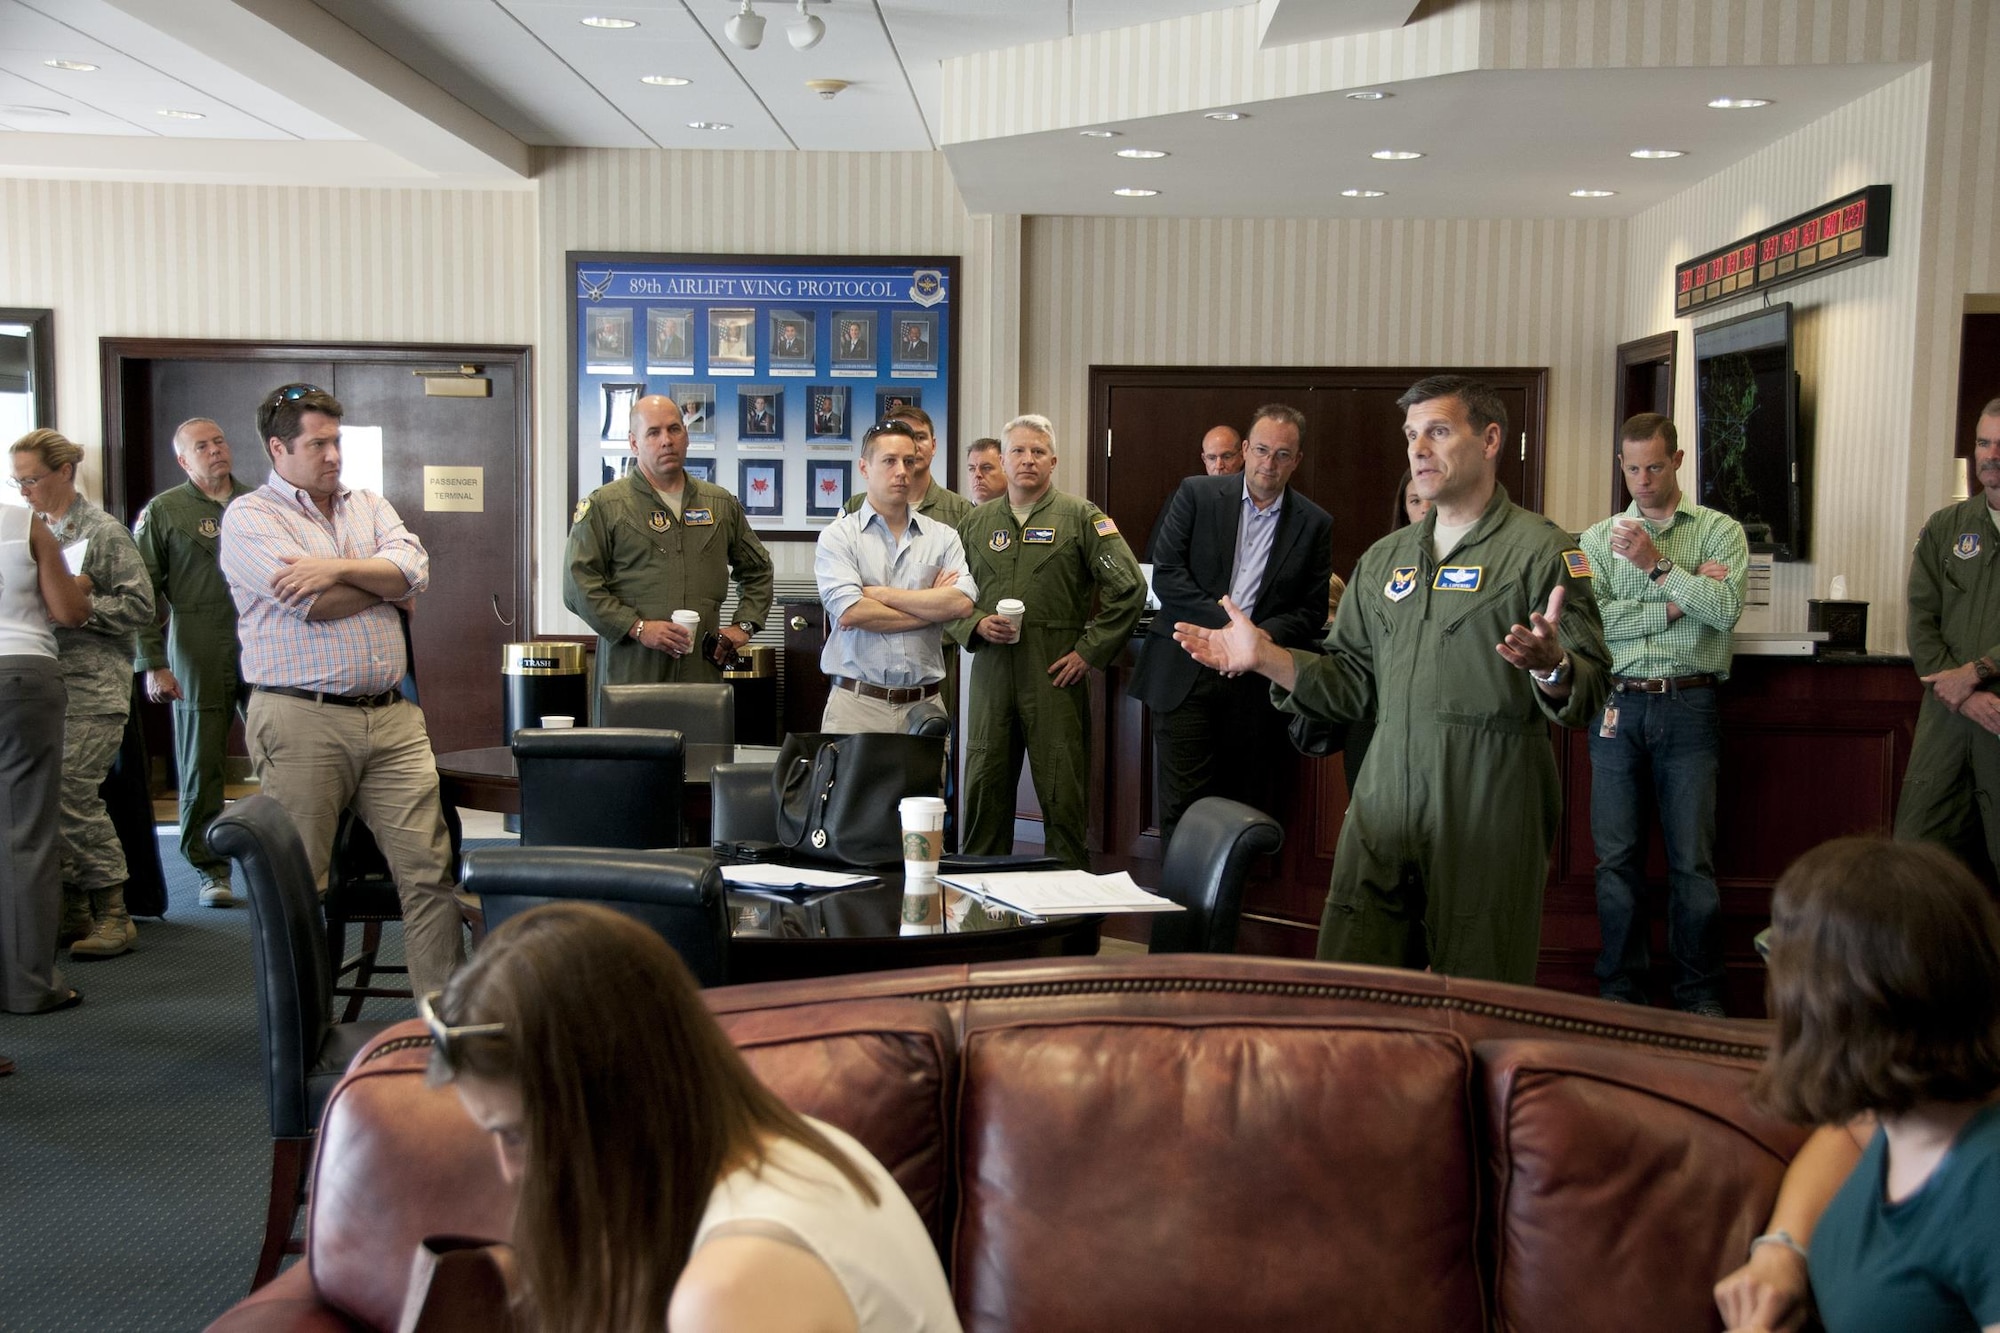 Brigadier Gen. Albert V. Lupenski, Headquarters U.S. Air Force Reserve Plans, Programs and Requirements director, provides an Air Force Reserve Command C-130 mission briefing to a group of congressional staffers at the passenger terminal distinguished visitor’s lounge, Joint Base Andrews, Md., June 28, 2016. In honor of the 100th anniversary of U.S. air reserve power, staffers were invited to an event showcasing special missions conducted by C-130s in AFRC, to include weather surveillance, firefighting and aerial spraying. (U.S. Air Force photo/Staff Sgt. Kat Justen)